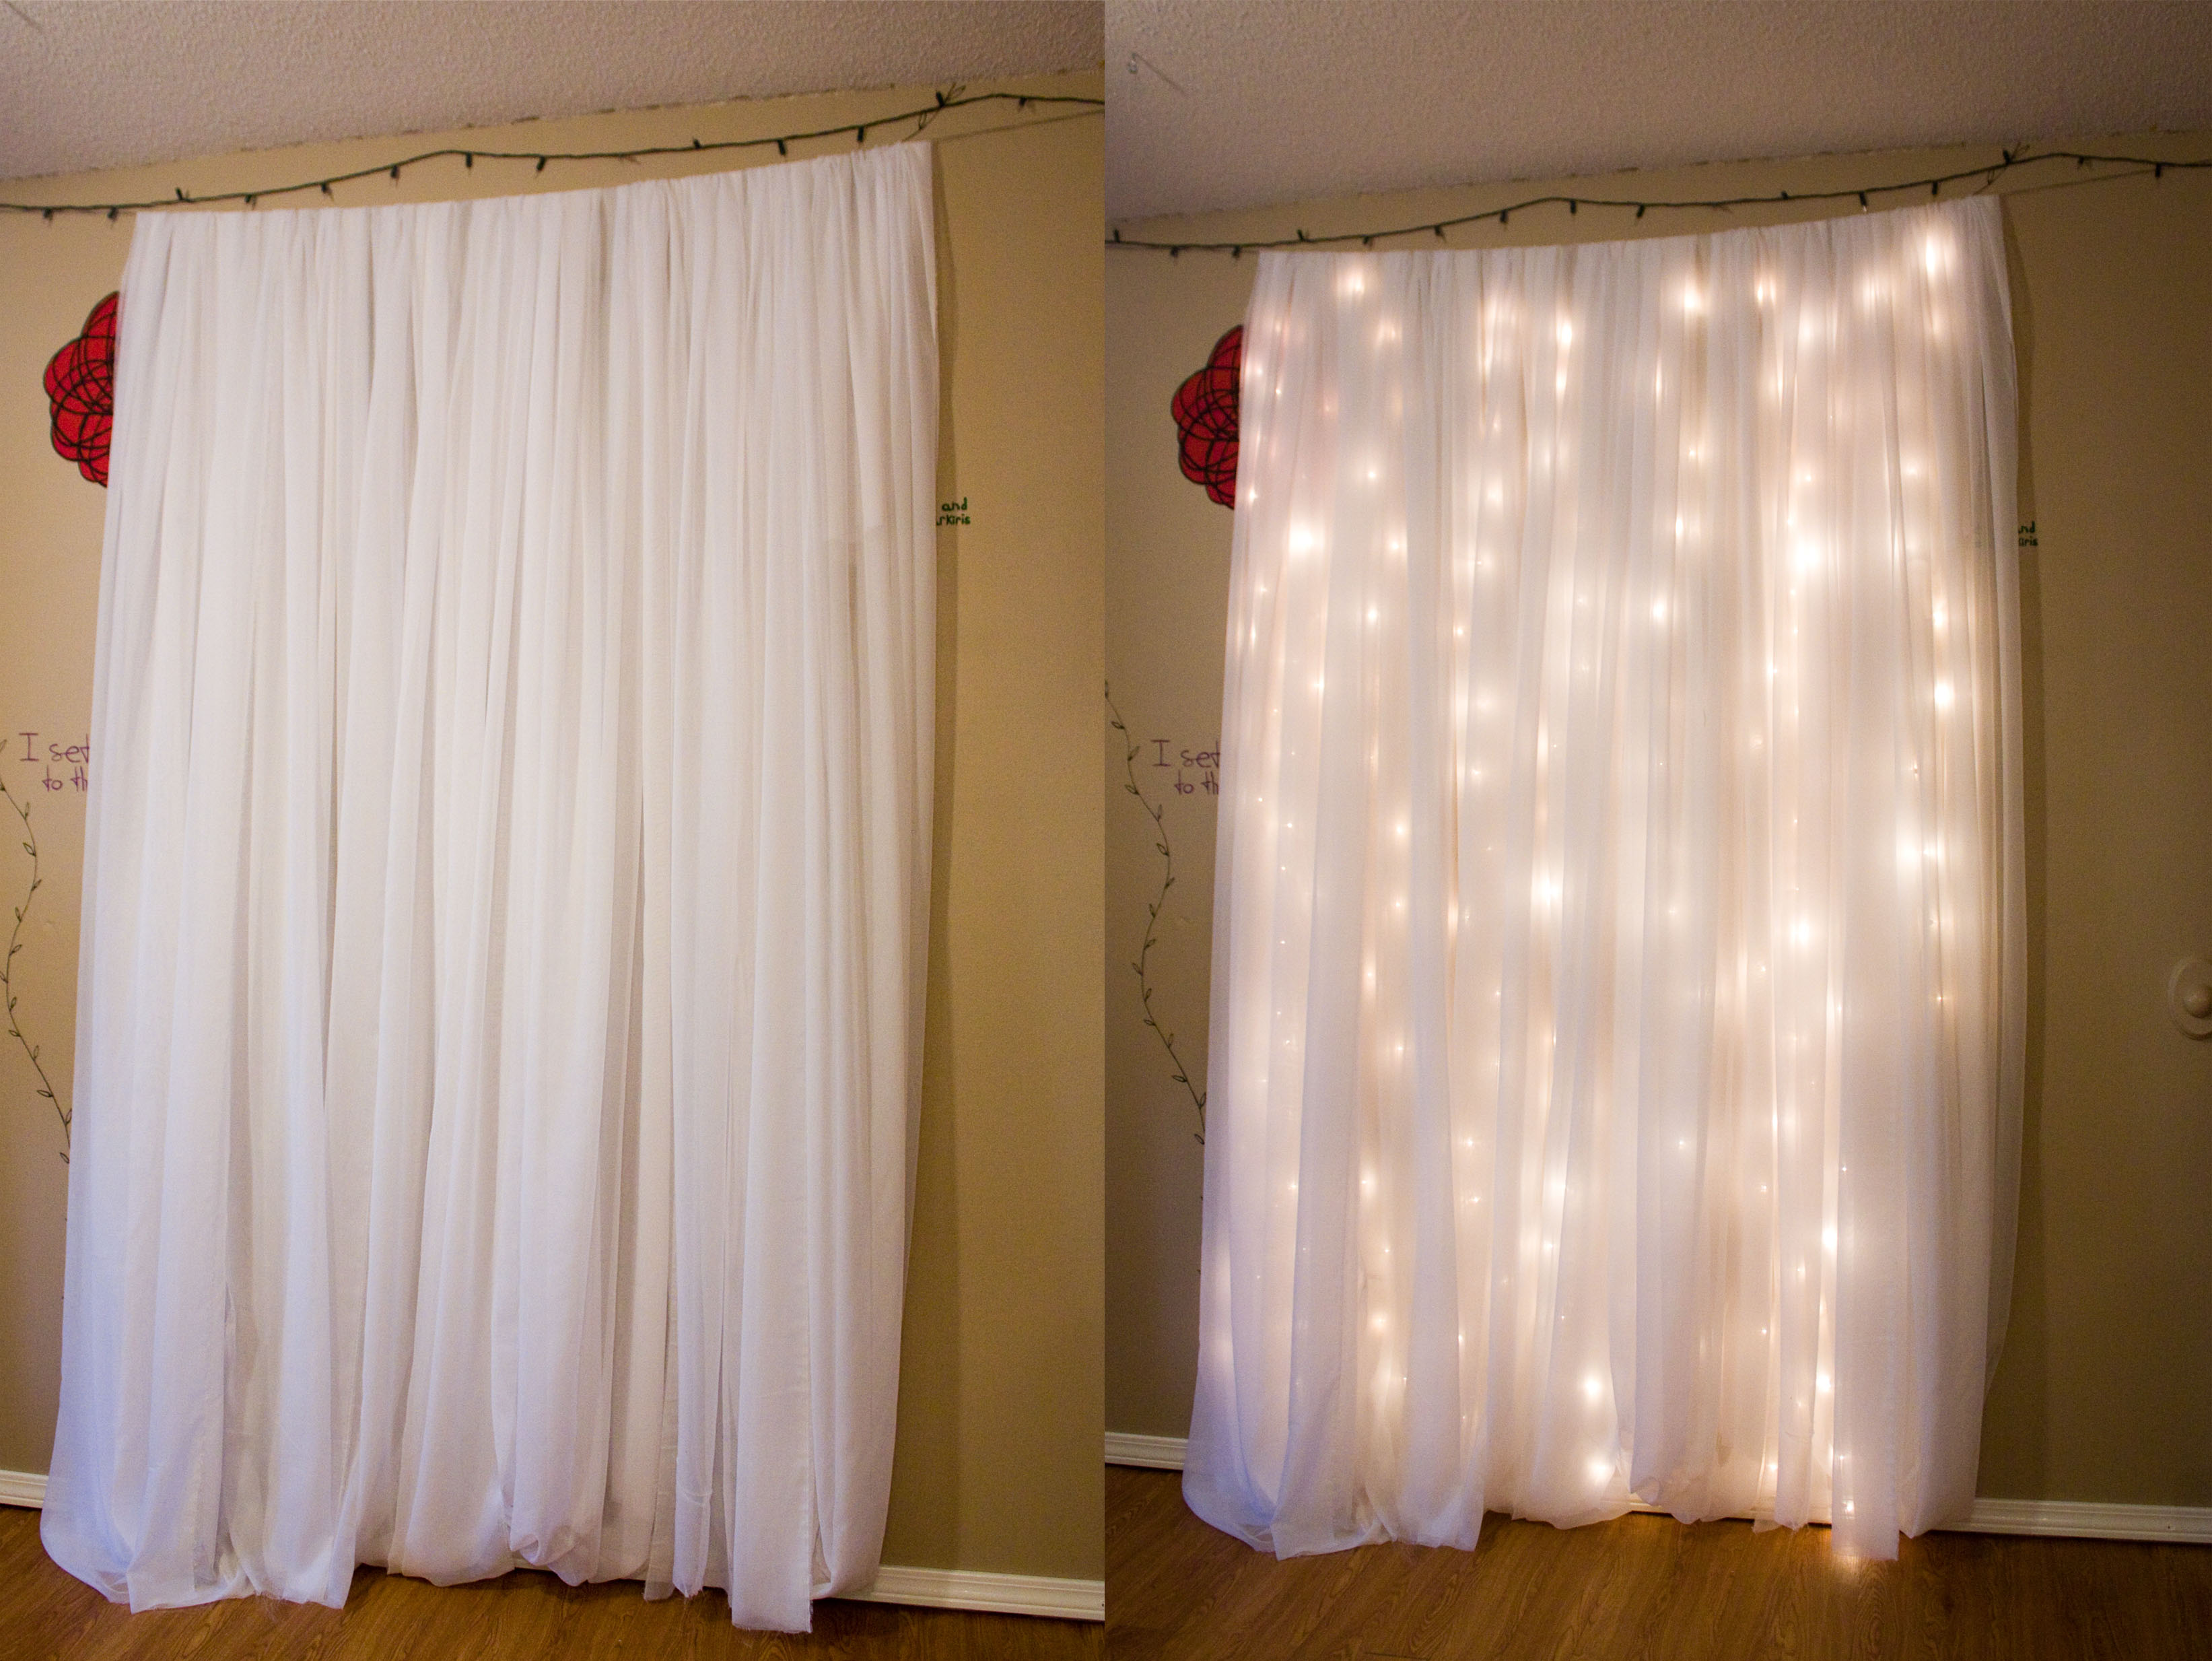 11 DIY Photography Backdrops For Holiday Images